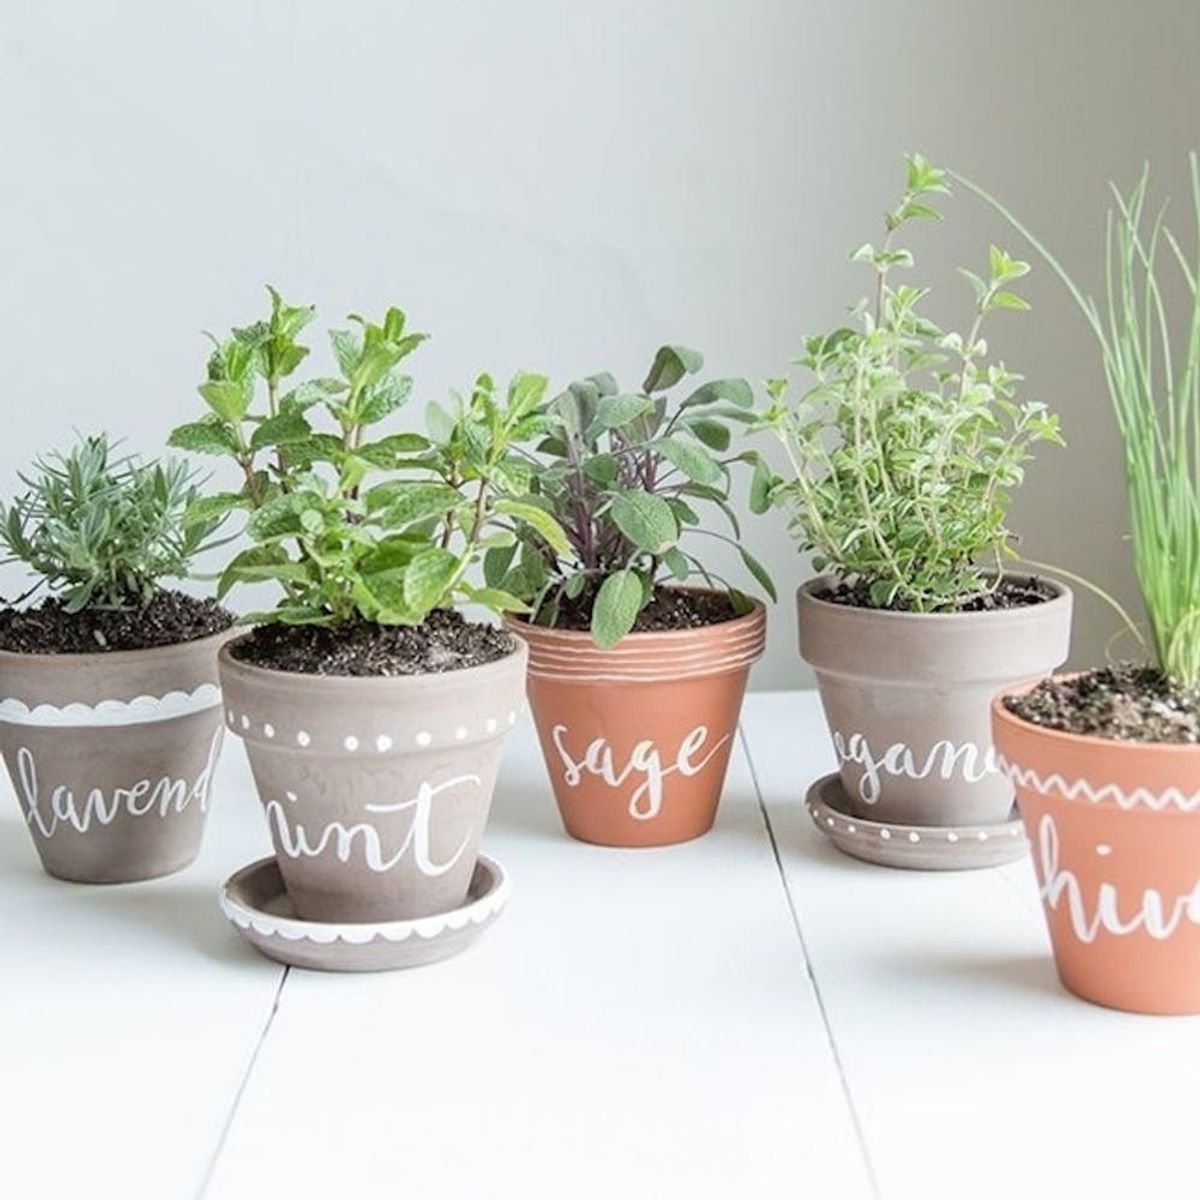 10 Tiny Herb Garden Ideas That Will Fit in Any Apartment